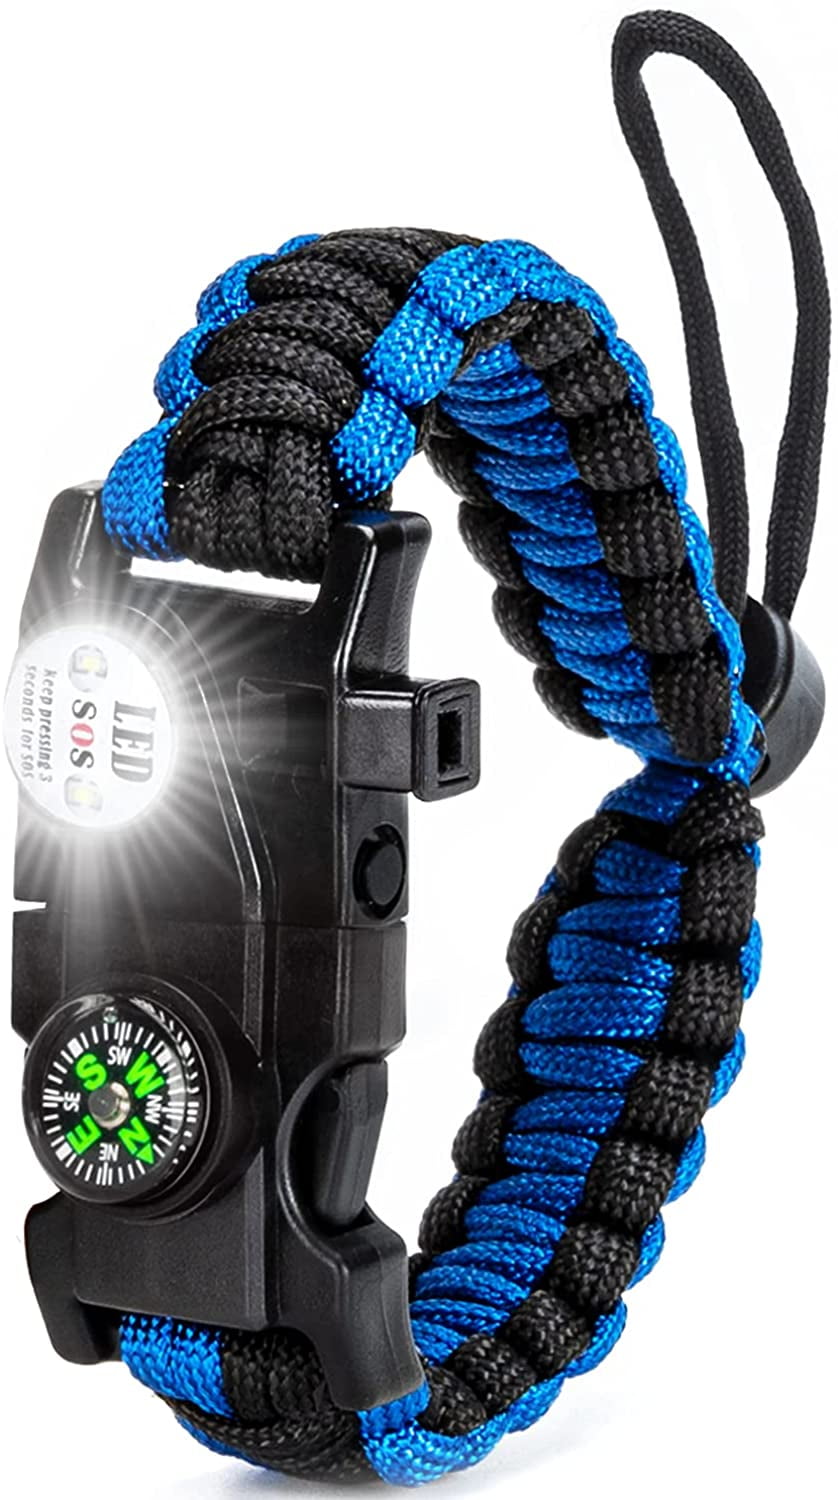 Survival Bracelet Paracord SOS Rechargeable Braided LED Flashlight Whistle Compass Rescue Bracelet Multifunctional Outdoor Gear 